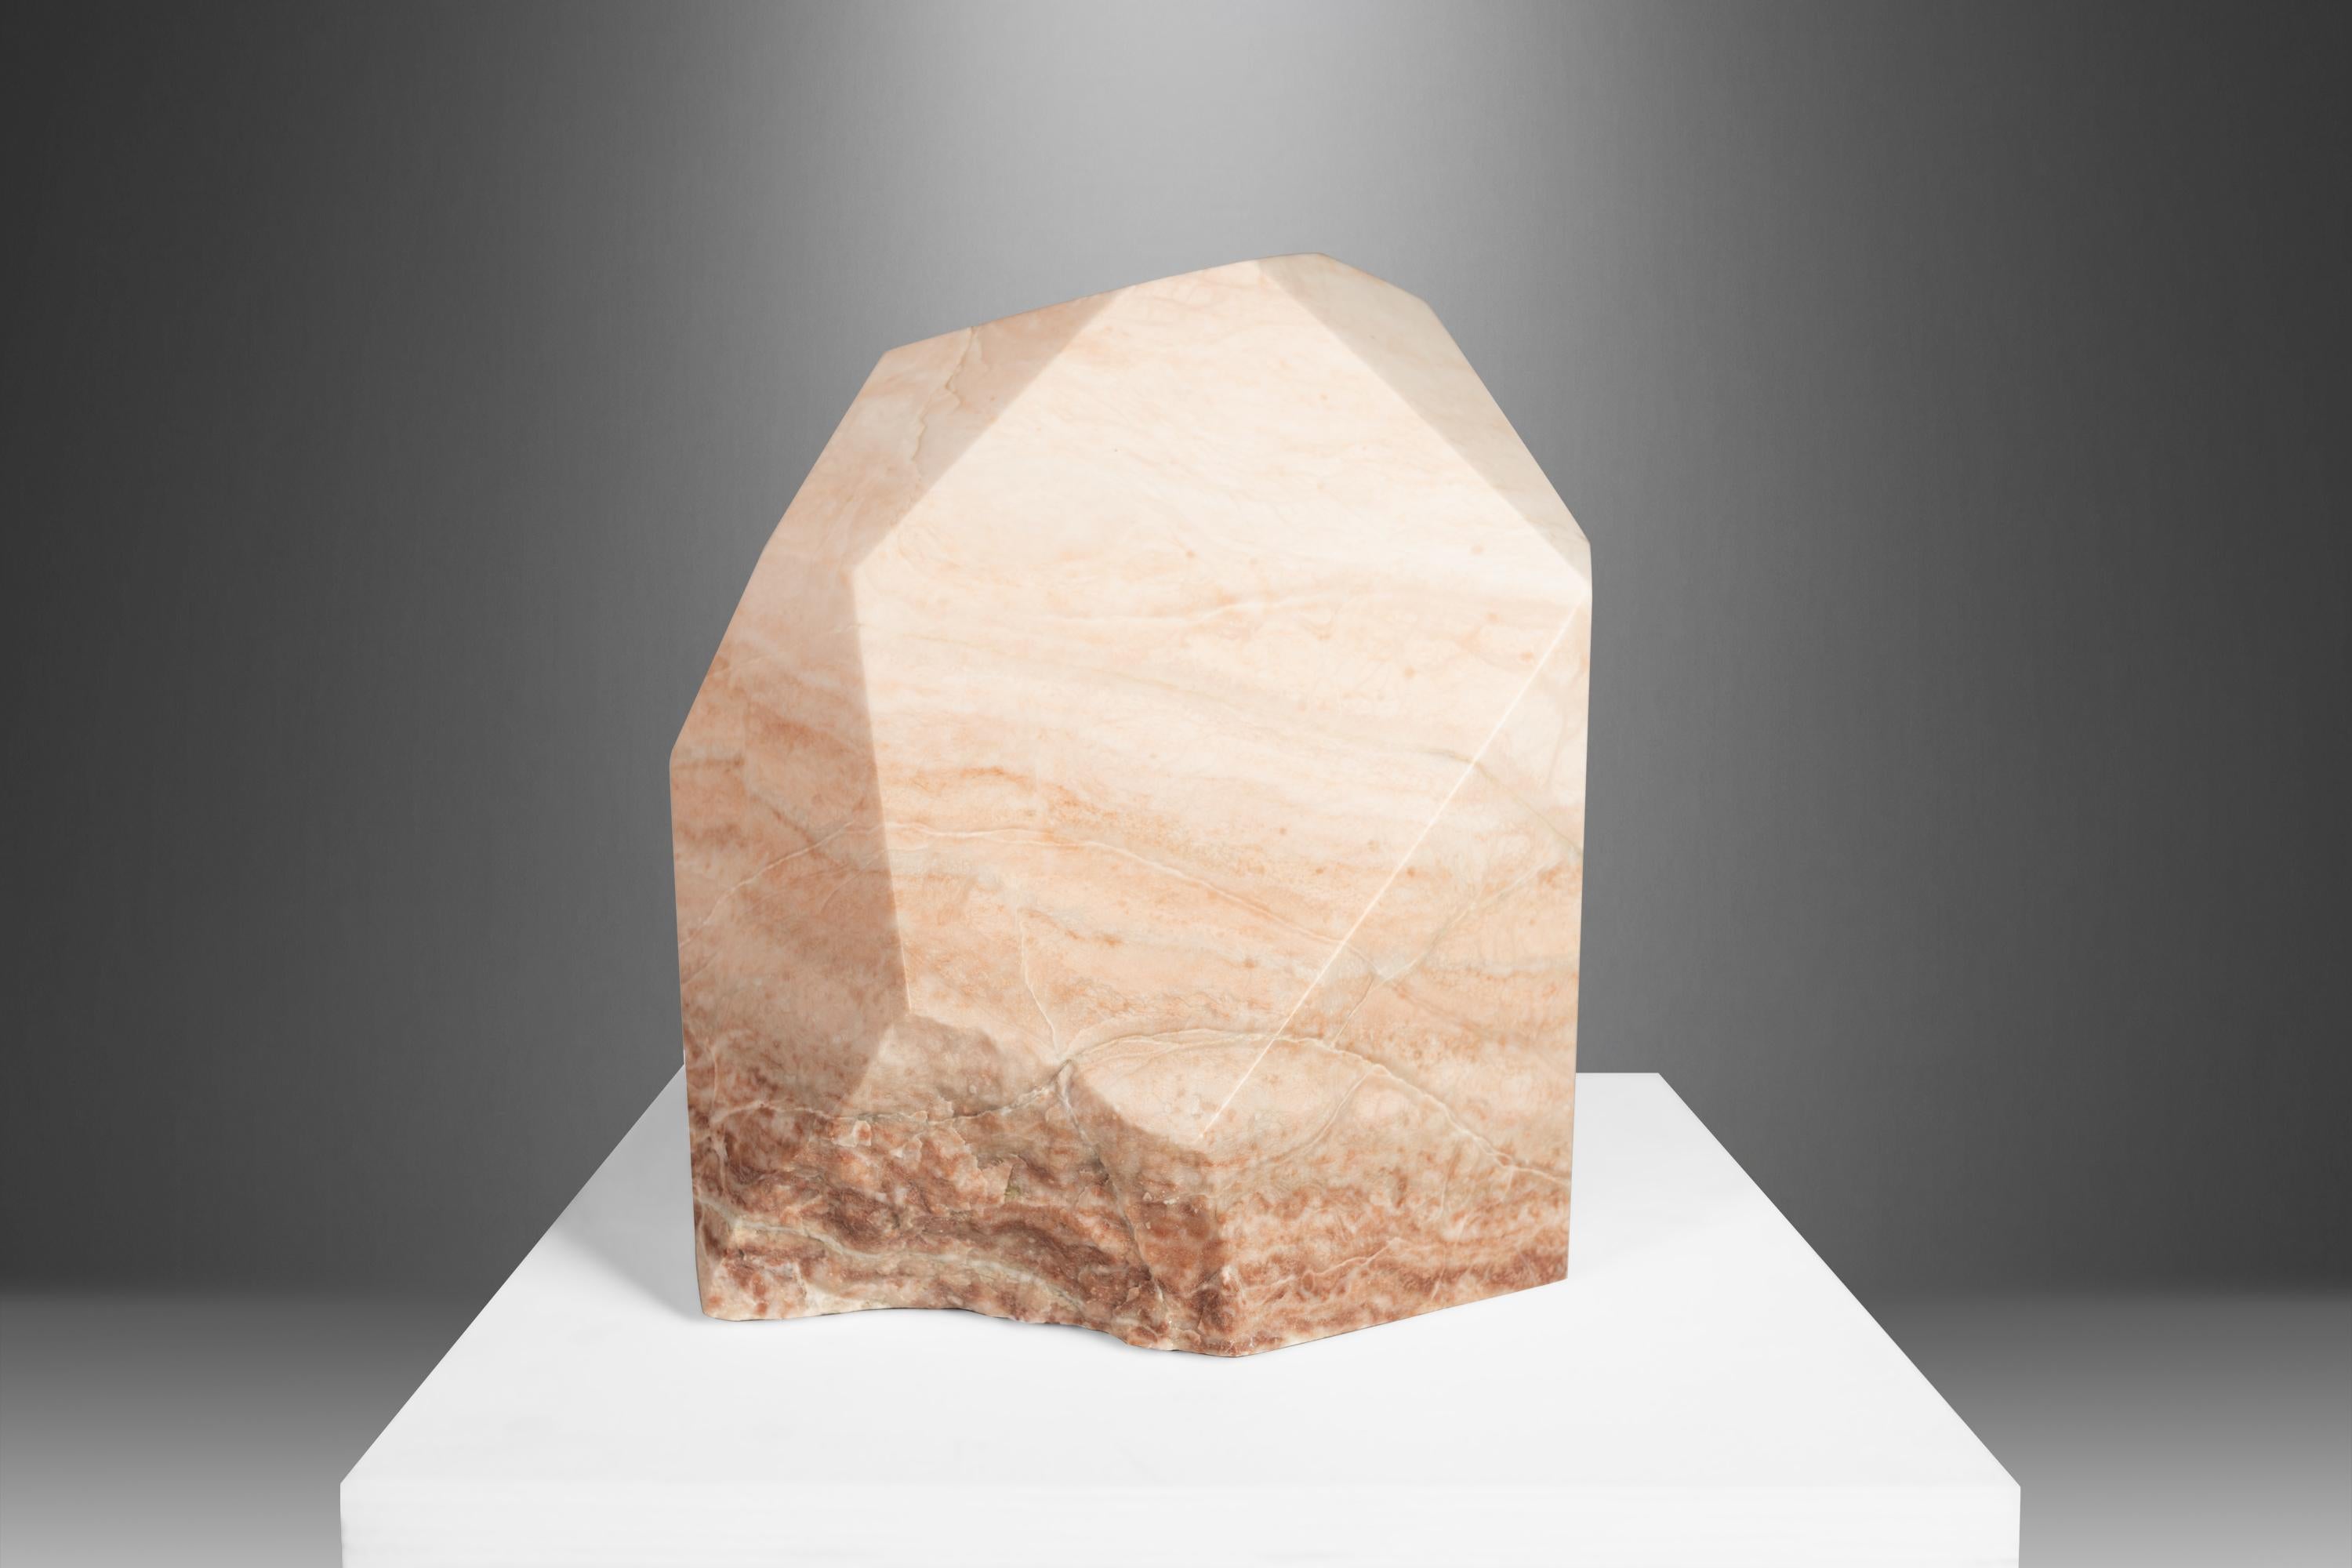 American Modern Abstract Sculpture in Solid Alabaster 'Diamond' by Mark Leblanc (1/8) USA For Sale